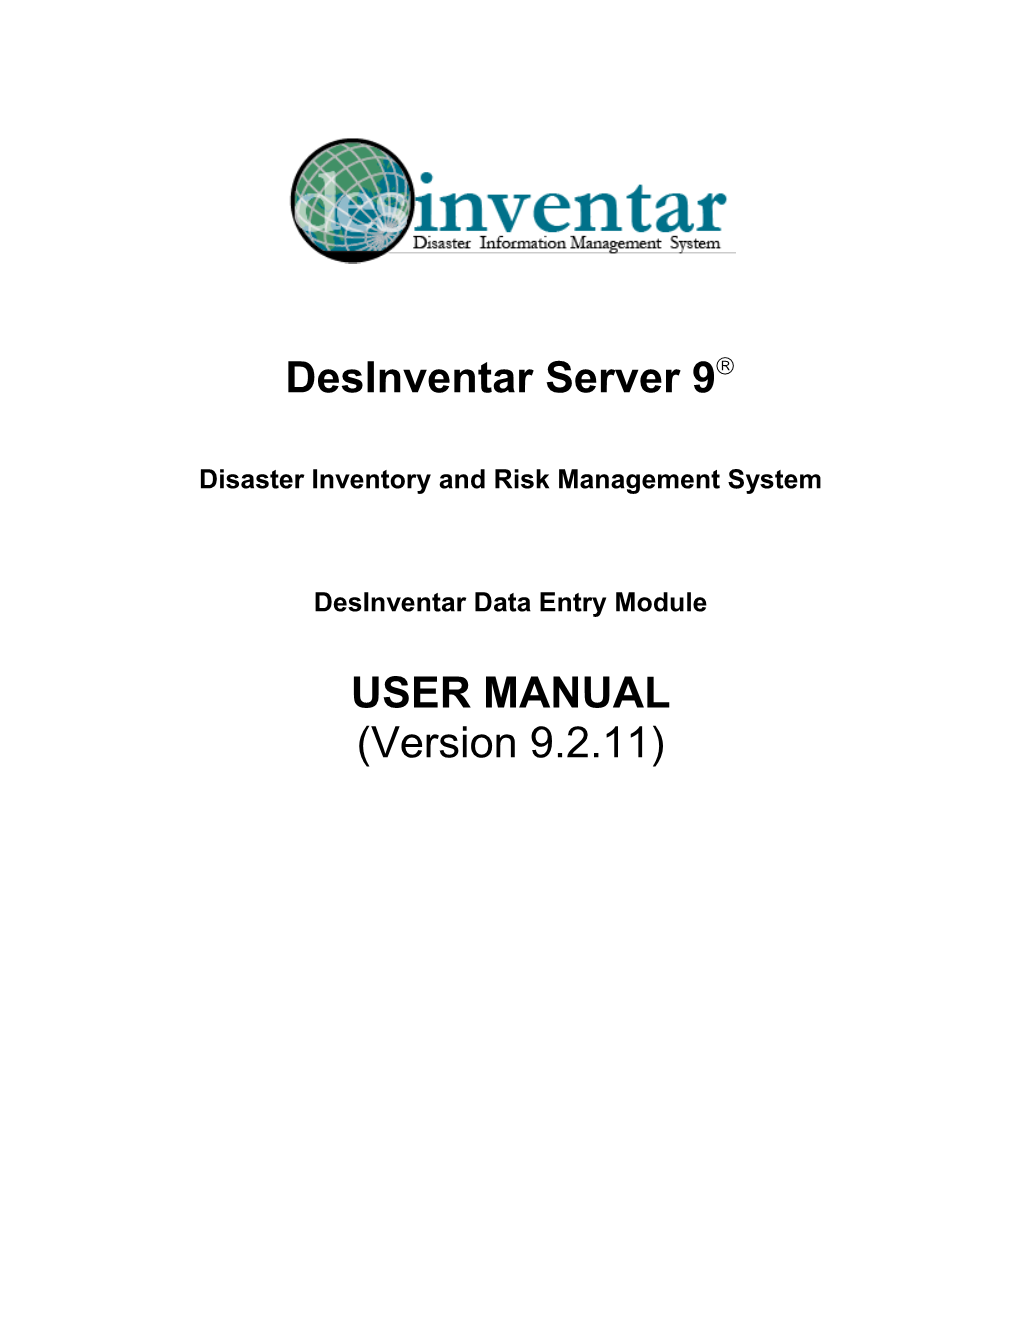 Disaster Inventory and Risk Management System